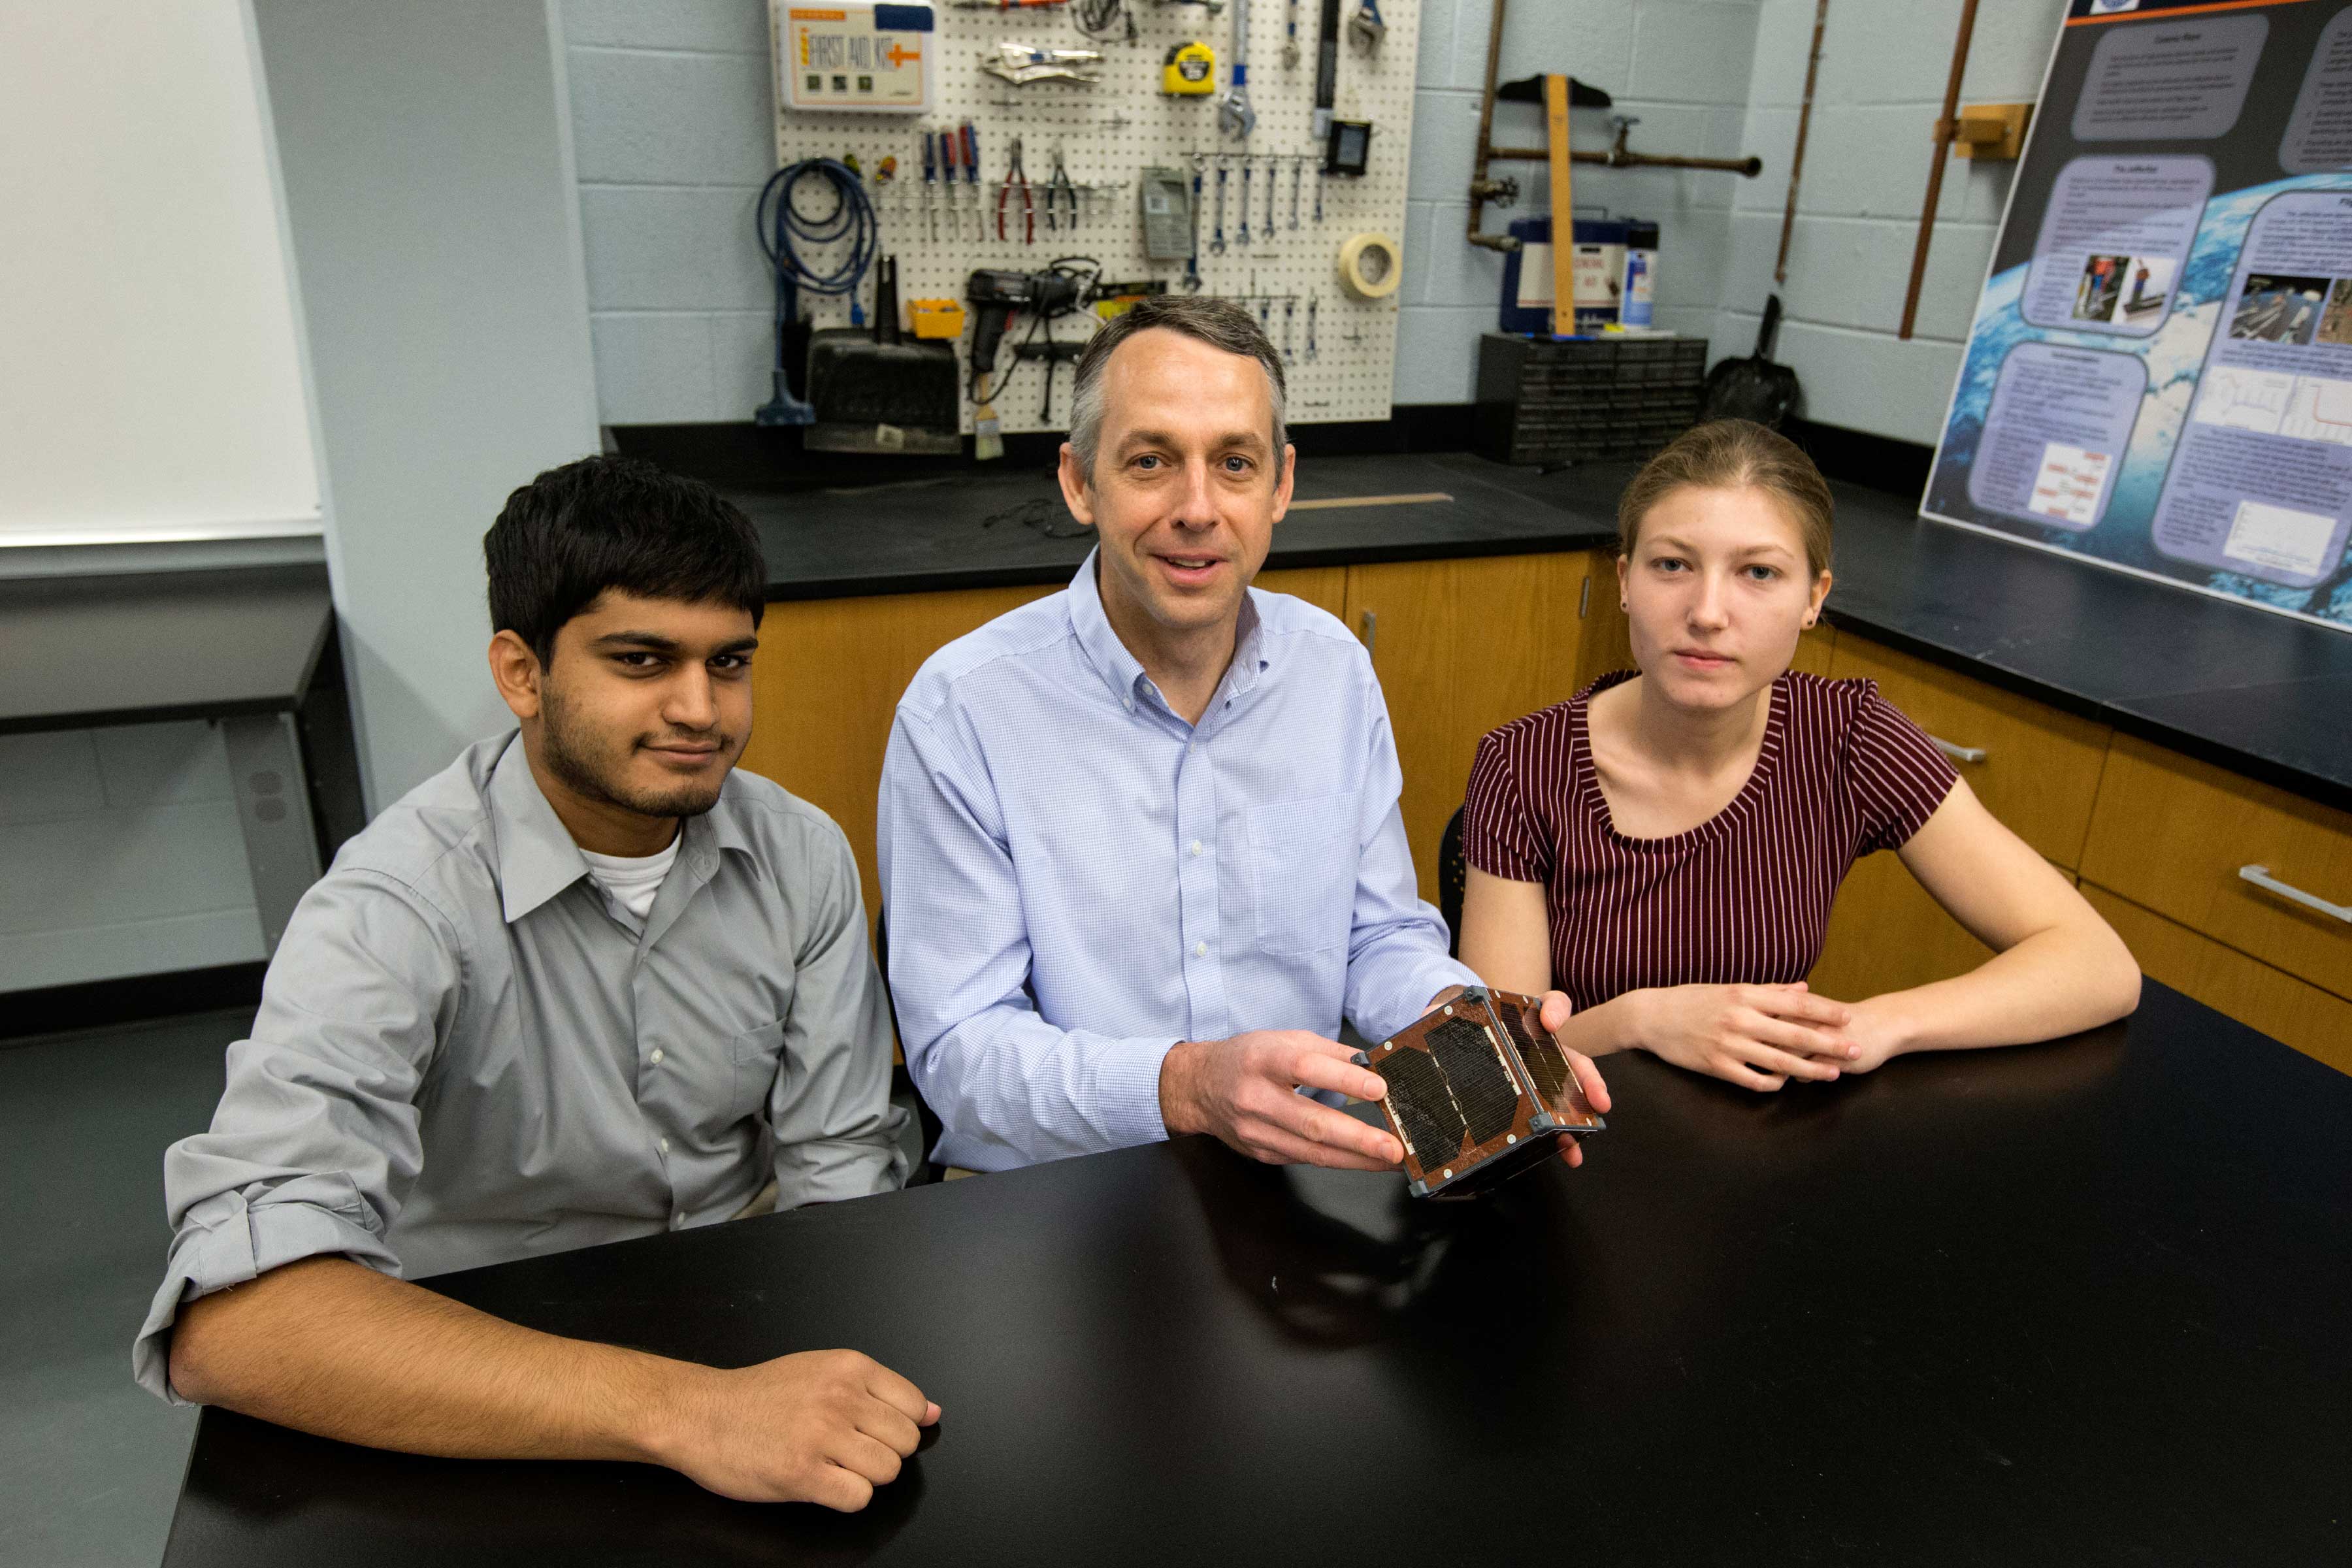 Aerospace engineering professor Chris Goyne, center, and students Chandrakanth “C.K.” Venigalla, left, and Robin Leiter are designing a mini satellite for a NASA experiment.